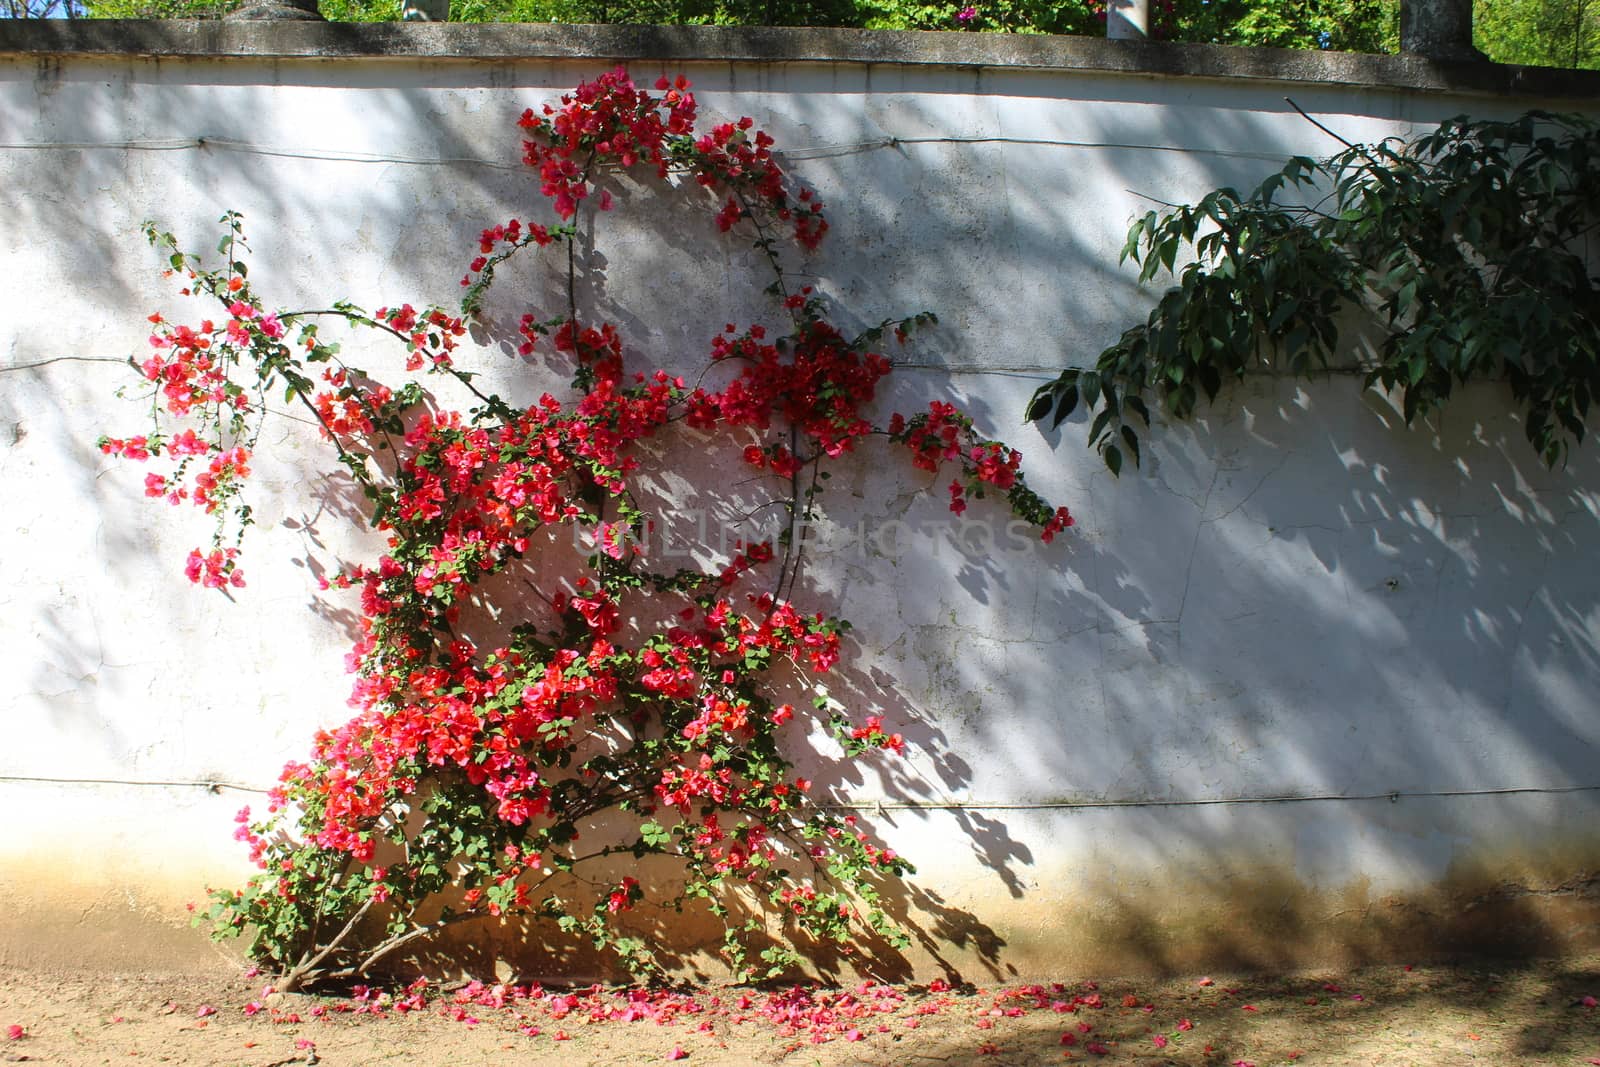 Bougainvillea spectabilis, known as great bougainvillea. Along the white wall. by mahirrov